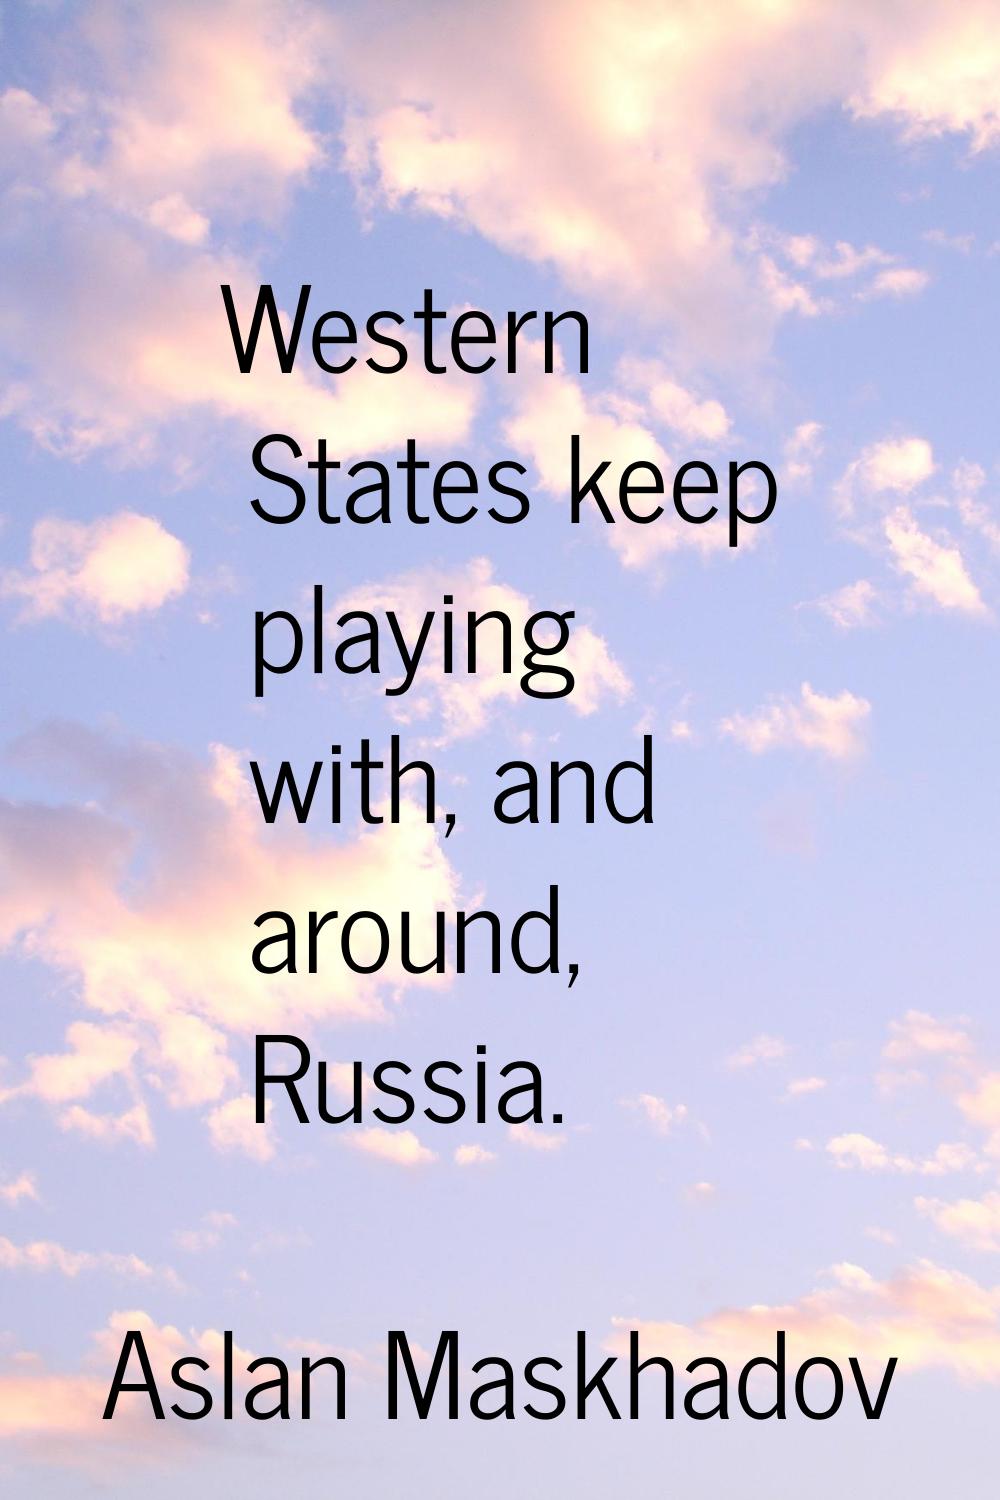 Western States keep playing with, and around, Russia.